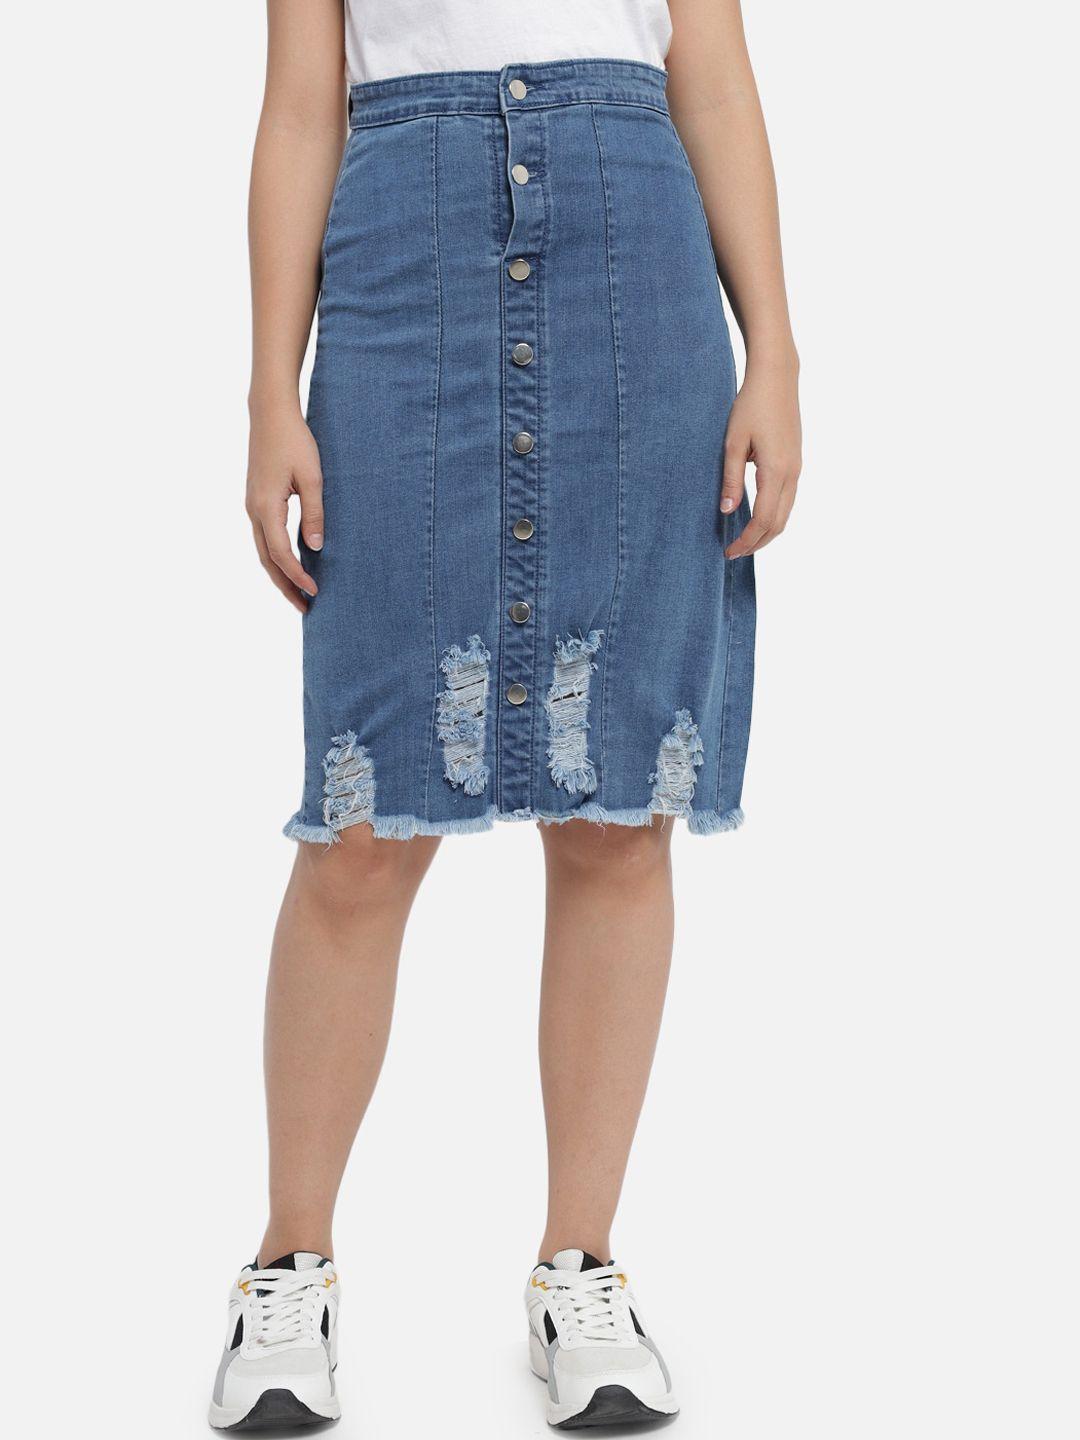 the-dry-state-women-blue-solid-washed-denim-a-line-skirt